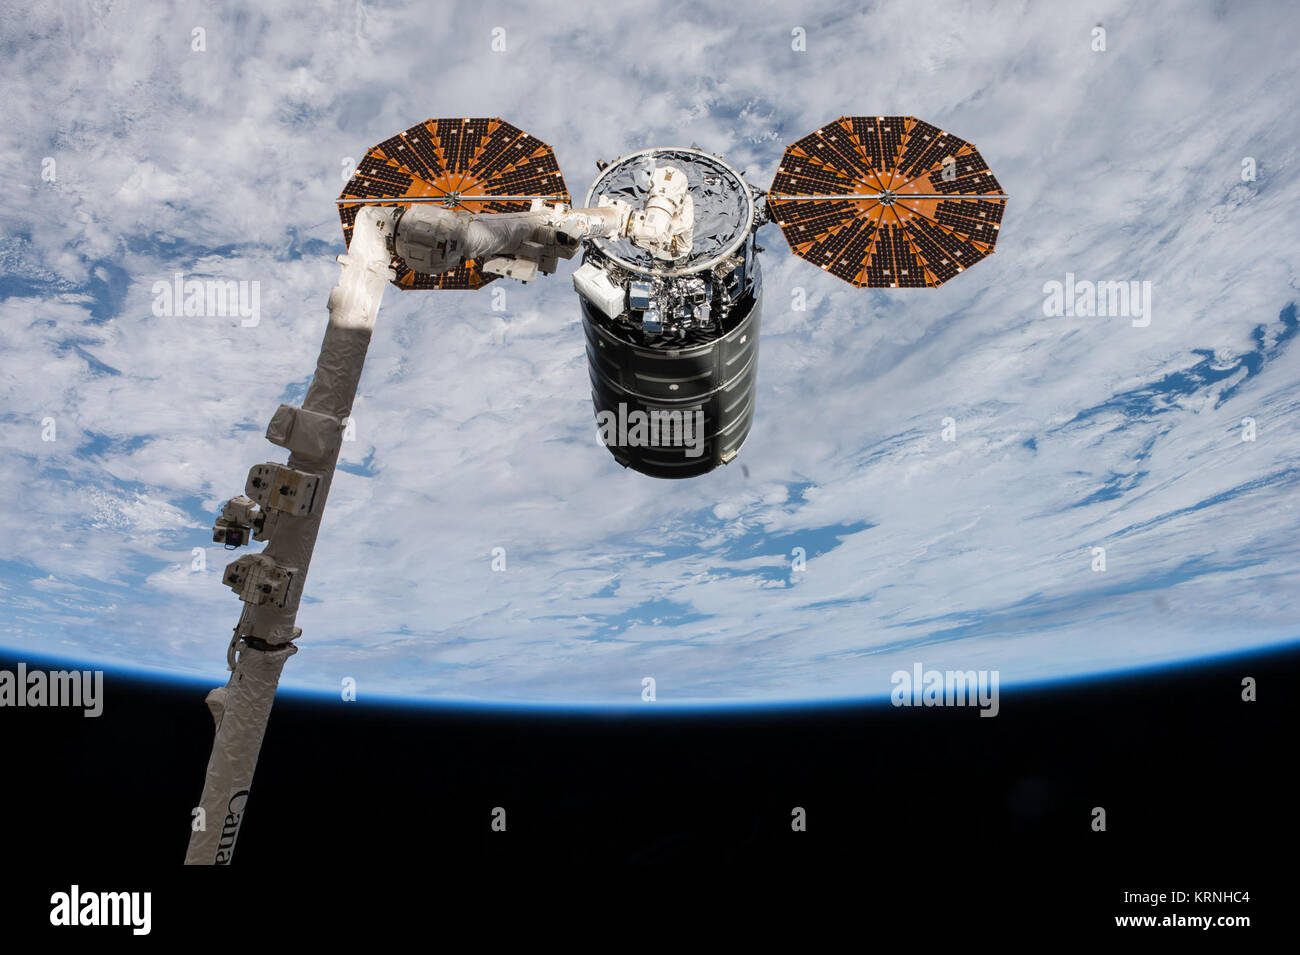 iss053e176292 (Nov. 14, 2017) --- The Cygnus spacecraft is pictured after it had been grappled with the Canadarm2 robotic arm by astronauts Paolo Nespoli and Randy Bresnik on Nov. 14, 2017. ISS-53 Cygnus OA-8 grappling to the ISS Stock Photo